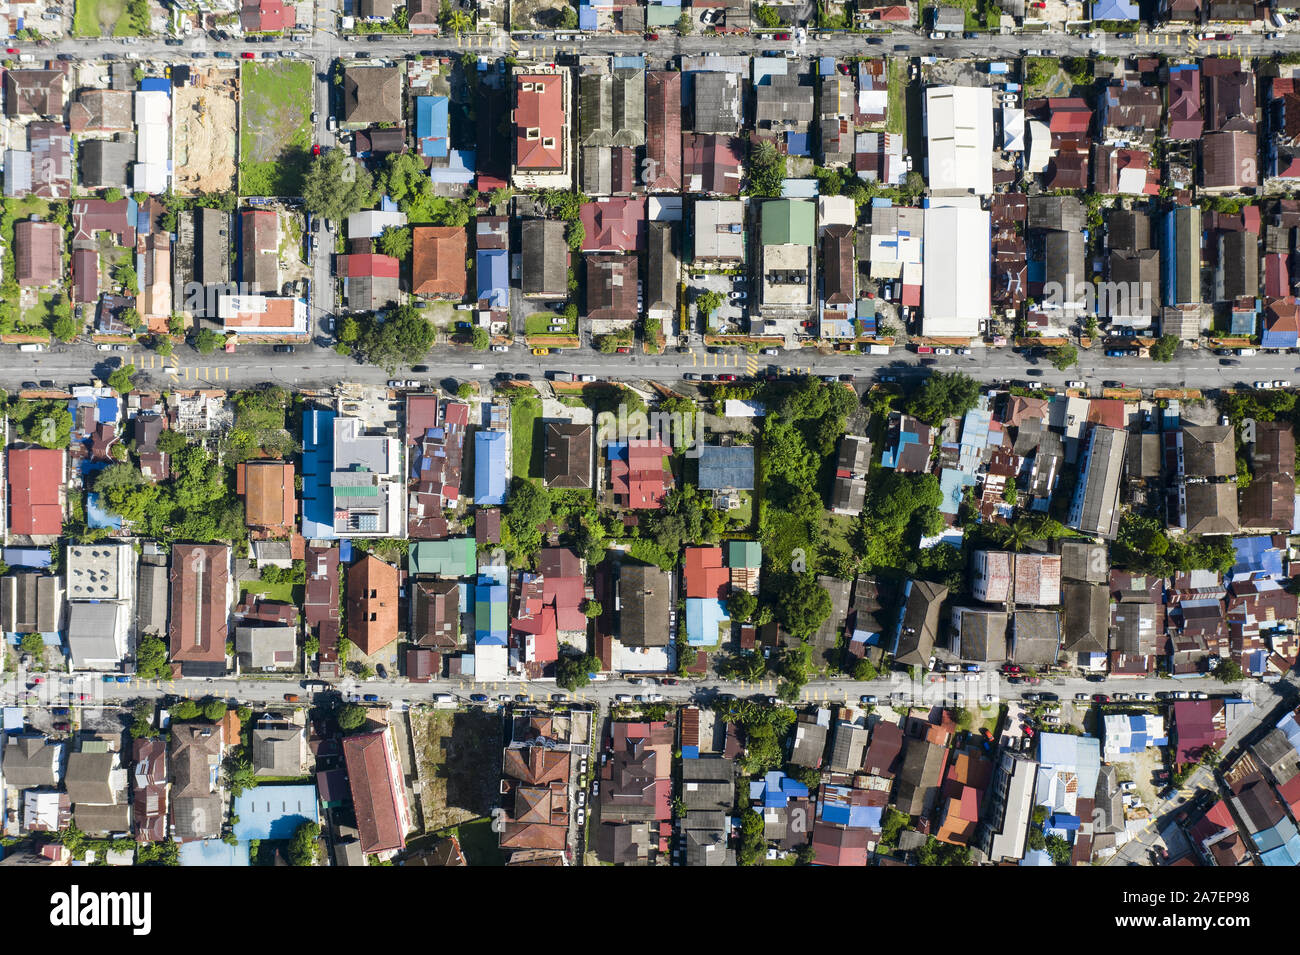 View from above, stunning aerial view of a residential neighborhood in Kuala Lumpur, Malaysia. Stock Photo